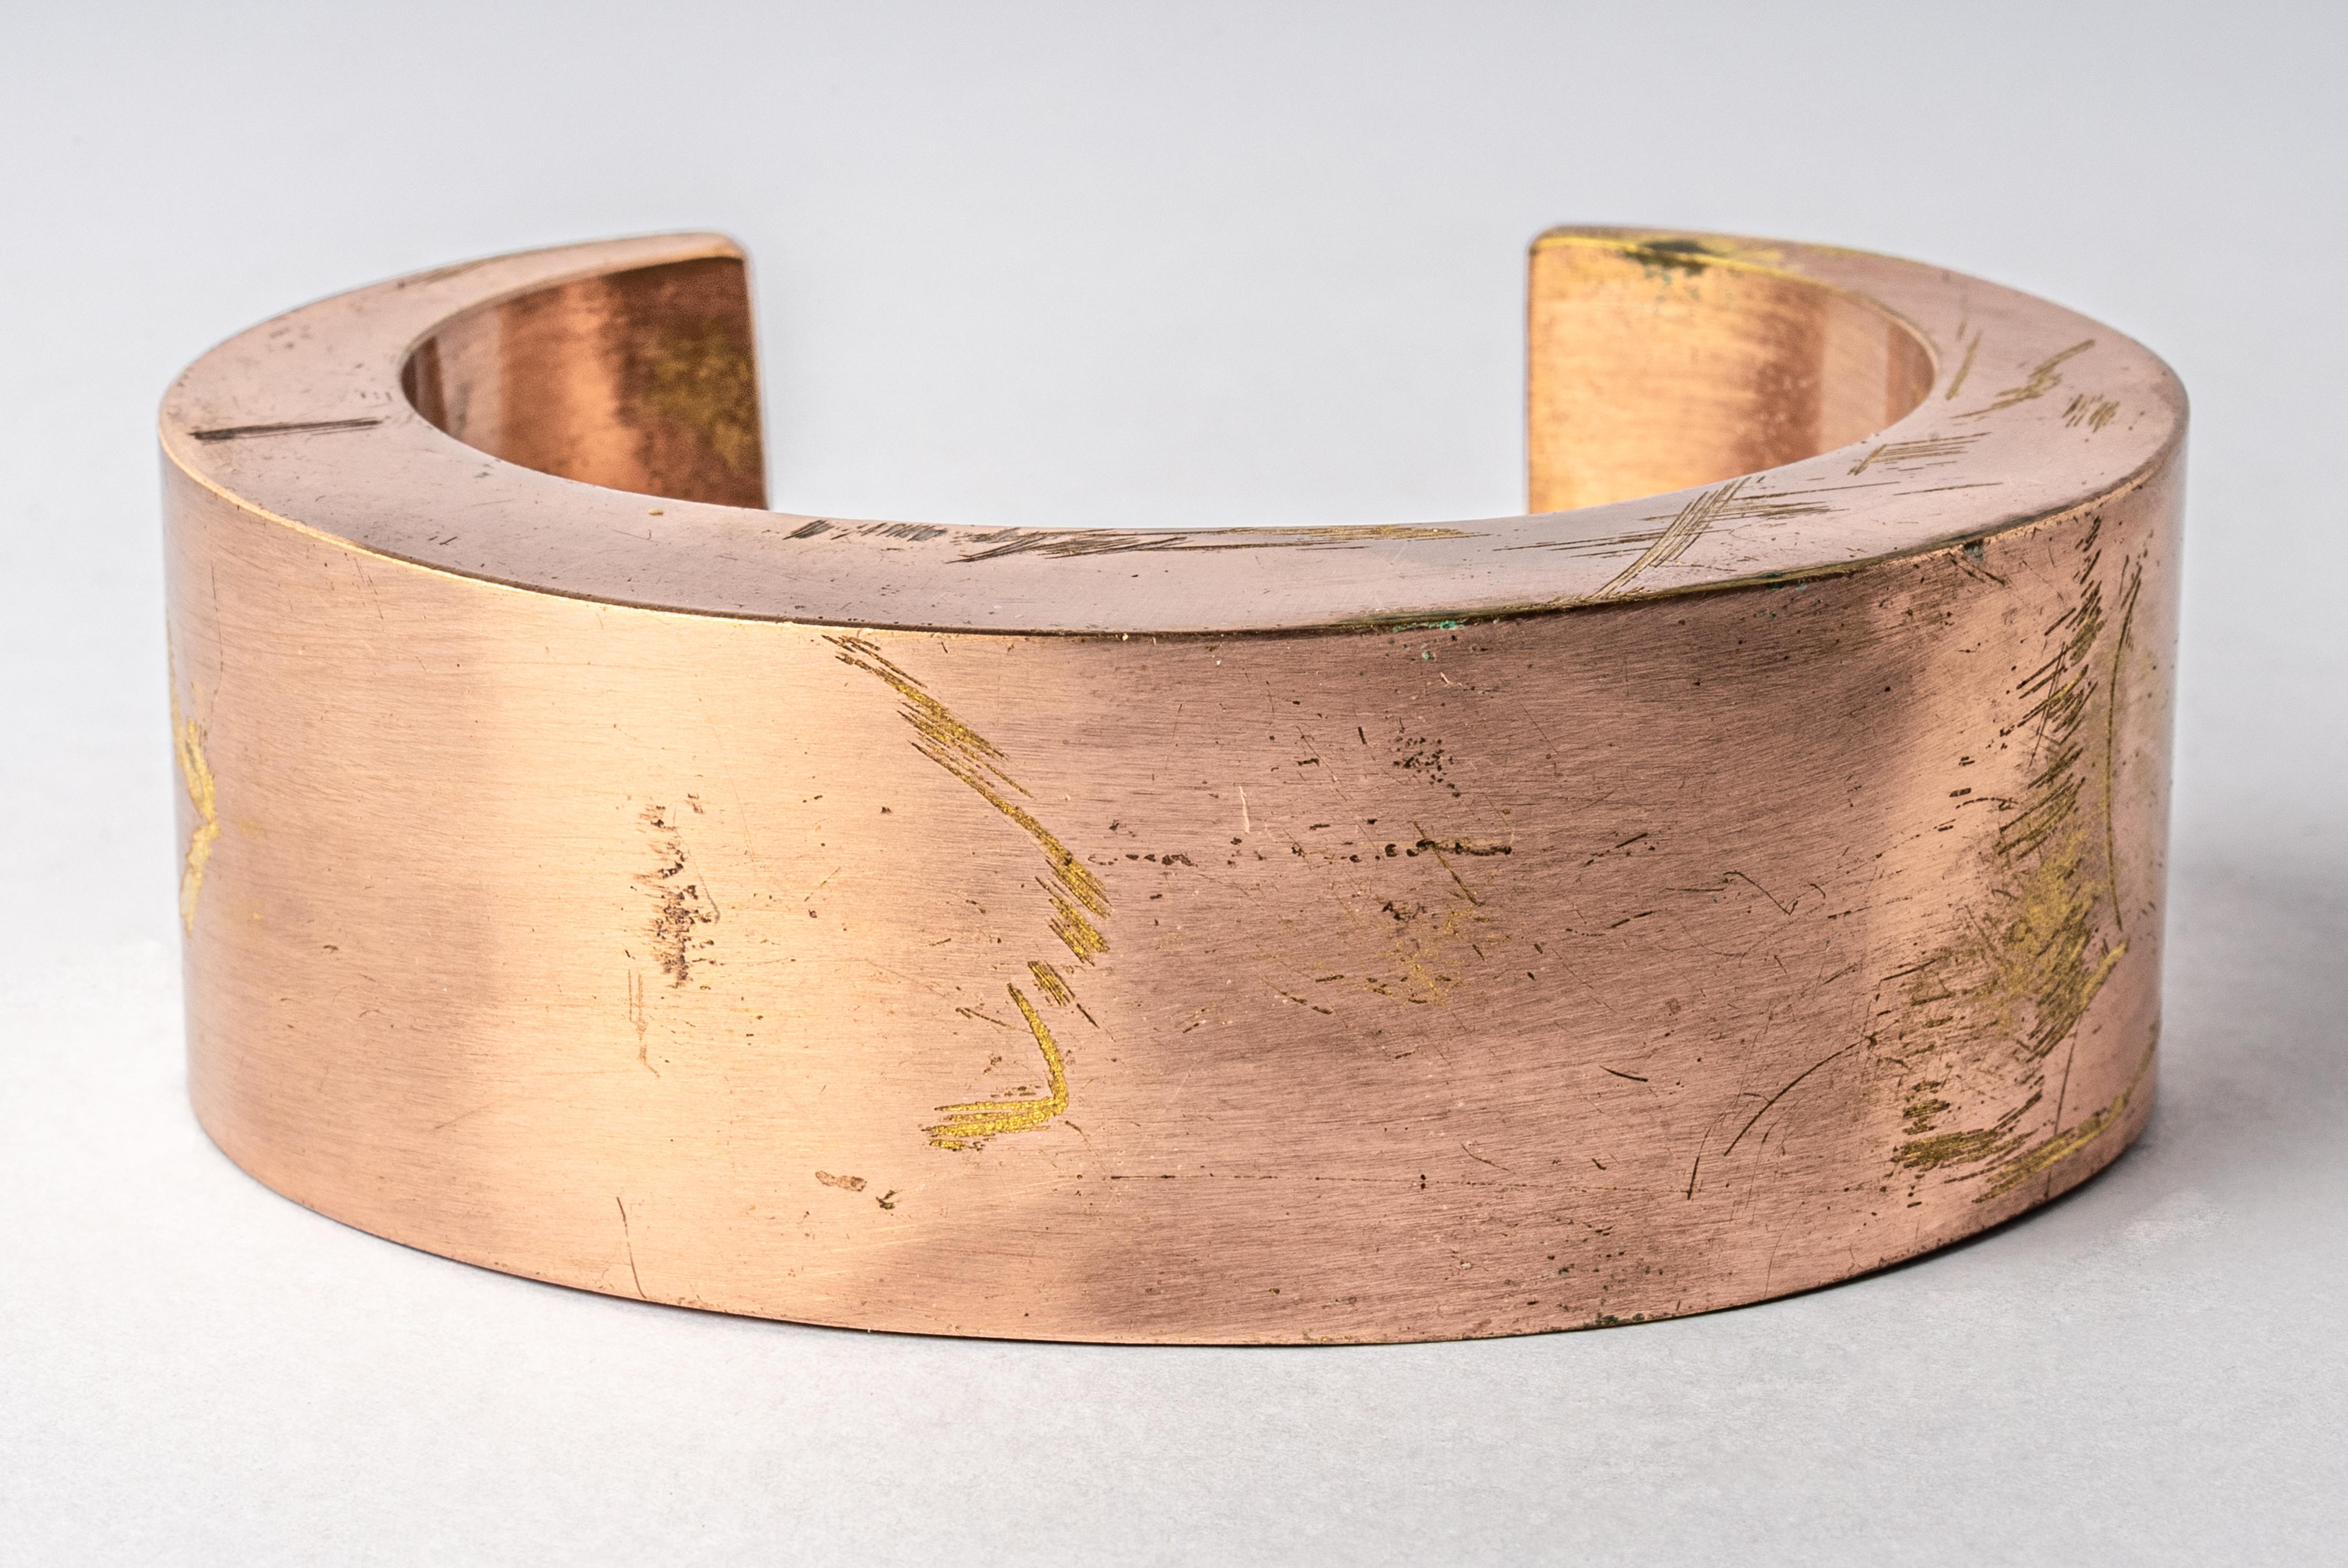 Bracelet in brass. Brass substrate is electroplated with 18k Rose Gold and then dipped into acid to create the subtly destroyed surface. This piece is 100% hand fabricated from metal plate; cut into sections and soldered together to make the hollow